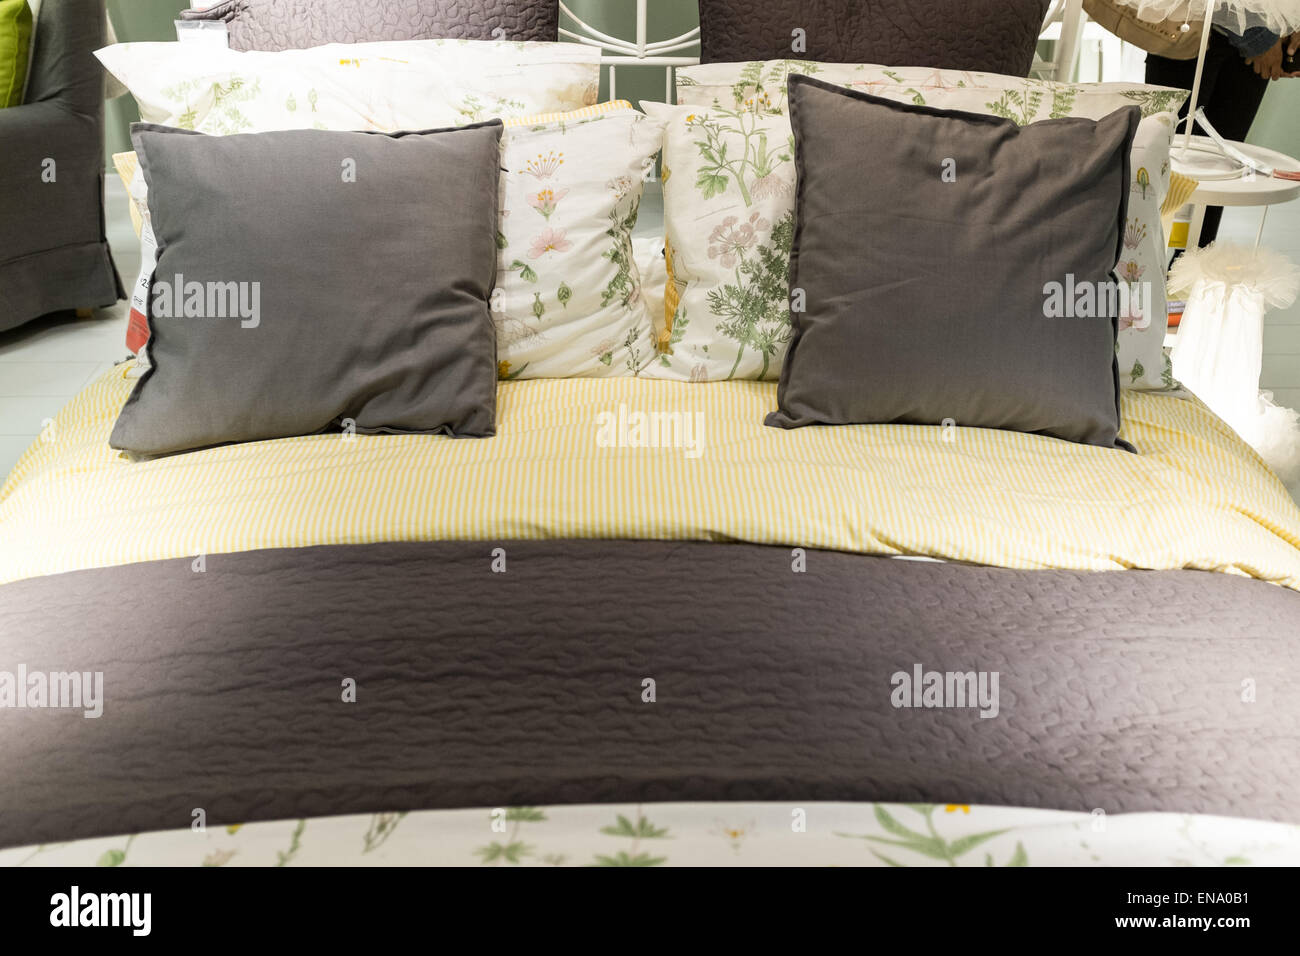 Bed display at ikea with pillows bedspread and duvet Stock Photo